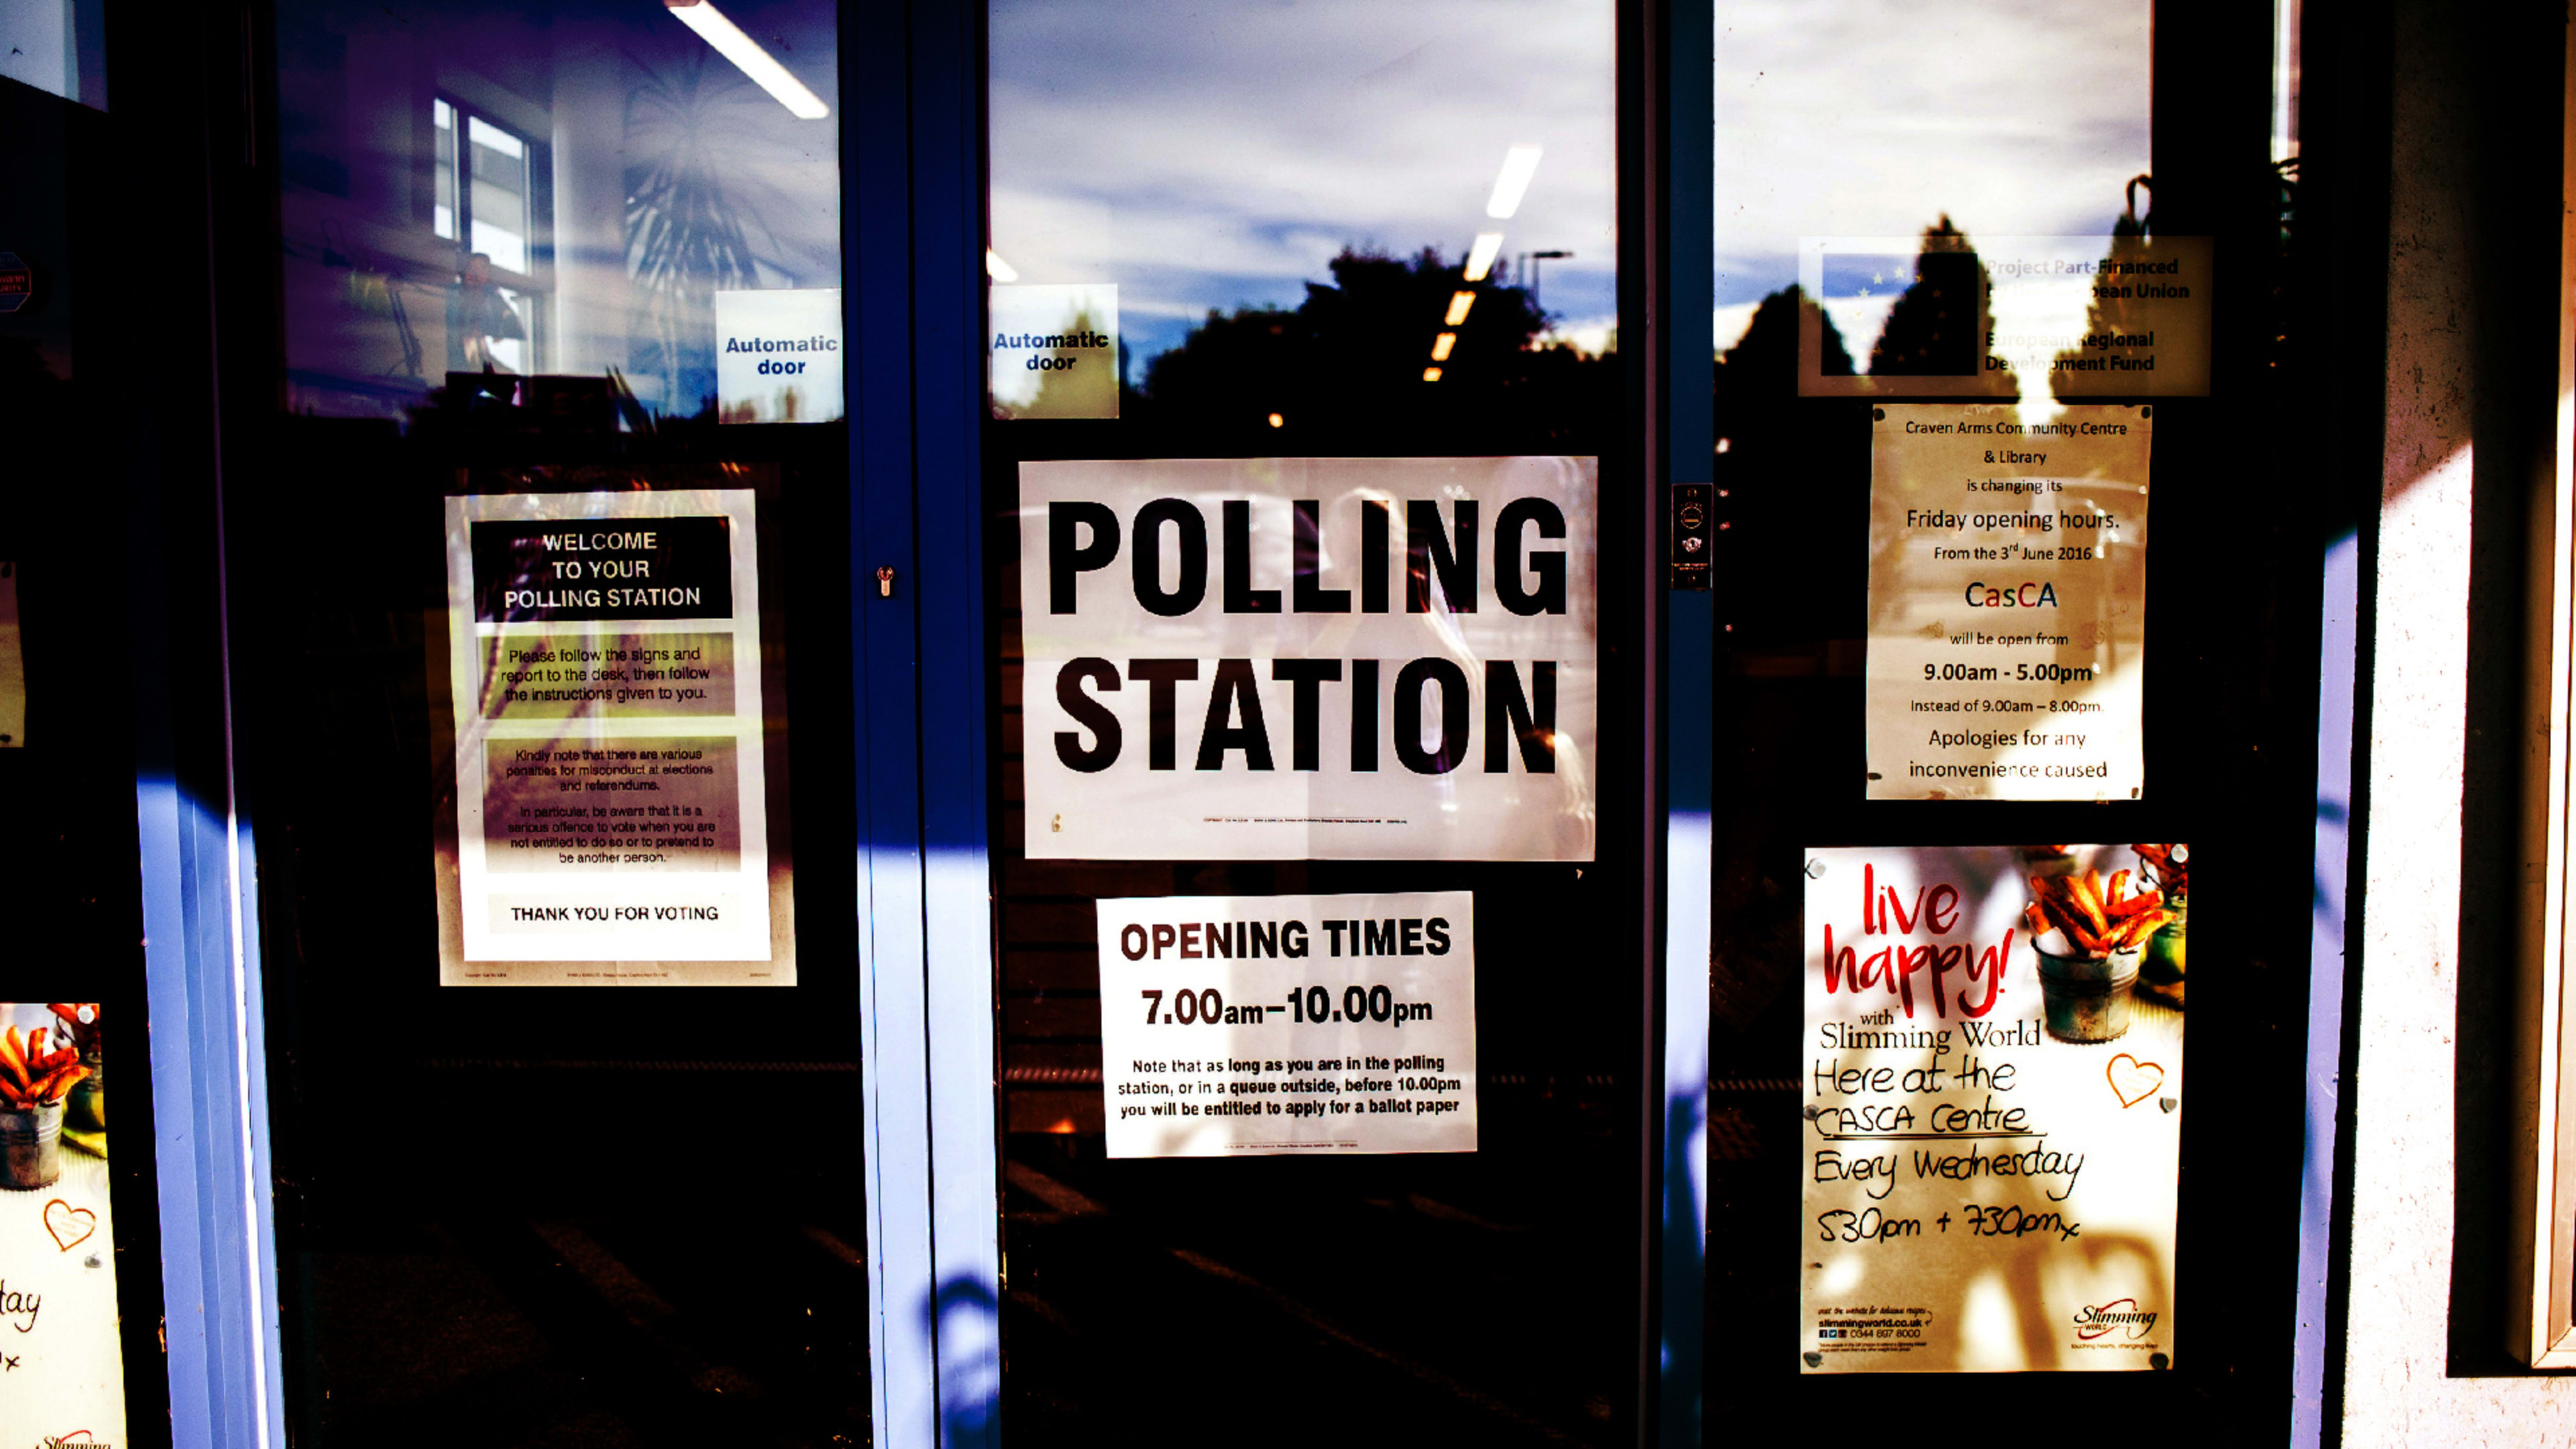 Trouble voting? Call or text these 3 resources to report election problems now